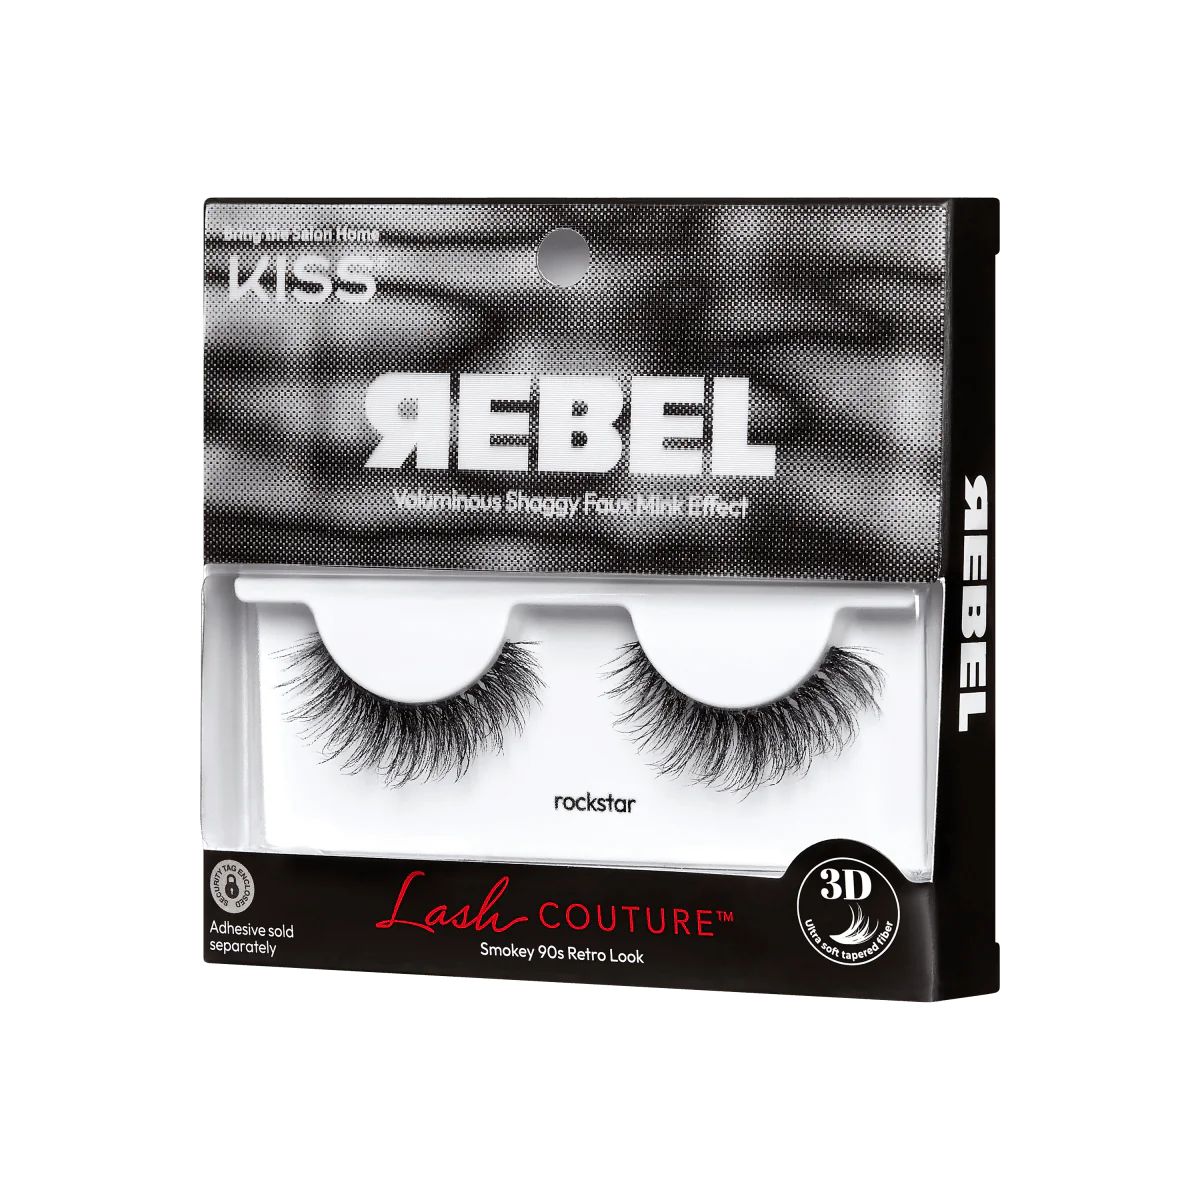 Rockstar Lashes | Rebel Lash Collection from Lash Couture by KISS USA | Celebrity Lashes | KISS, imPRESS, JOAH